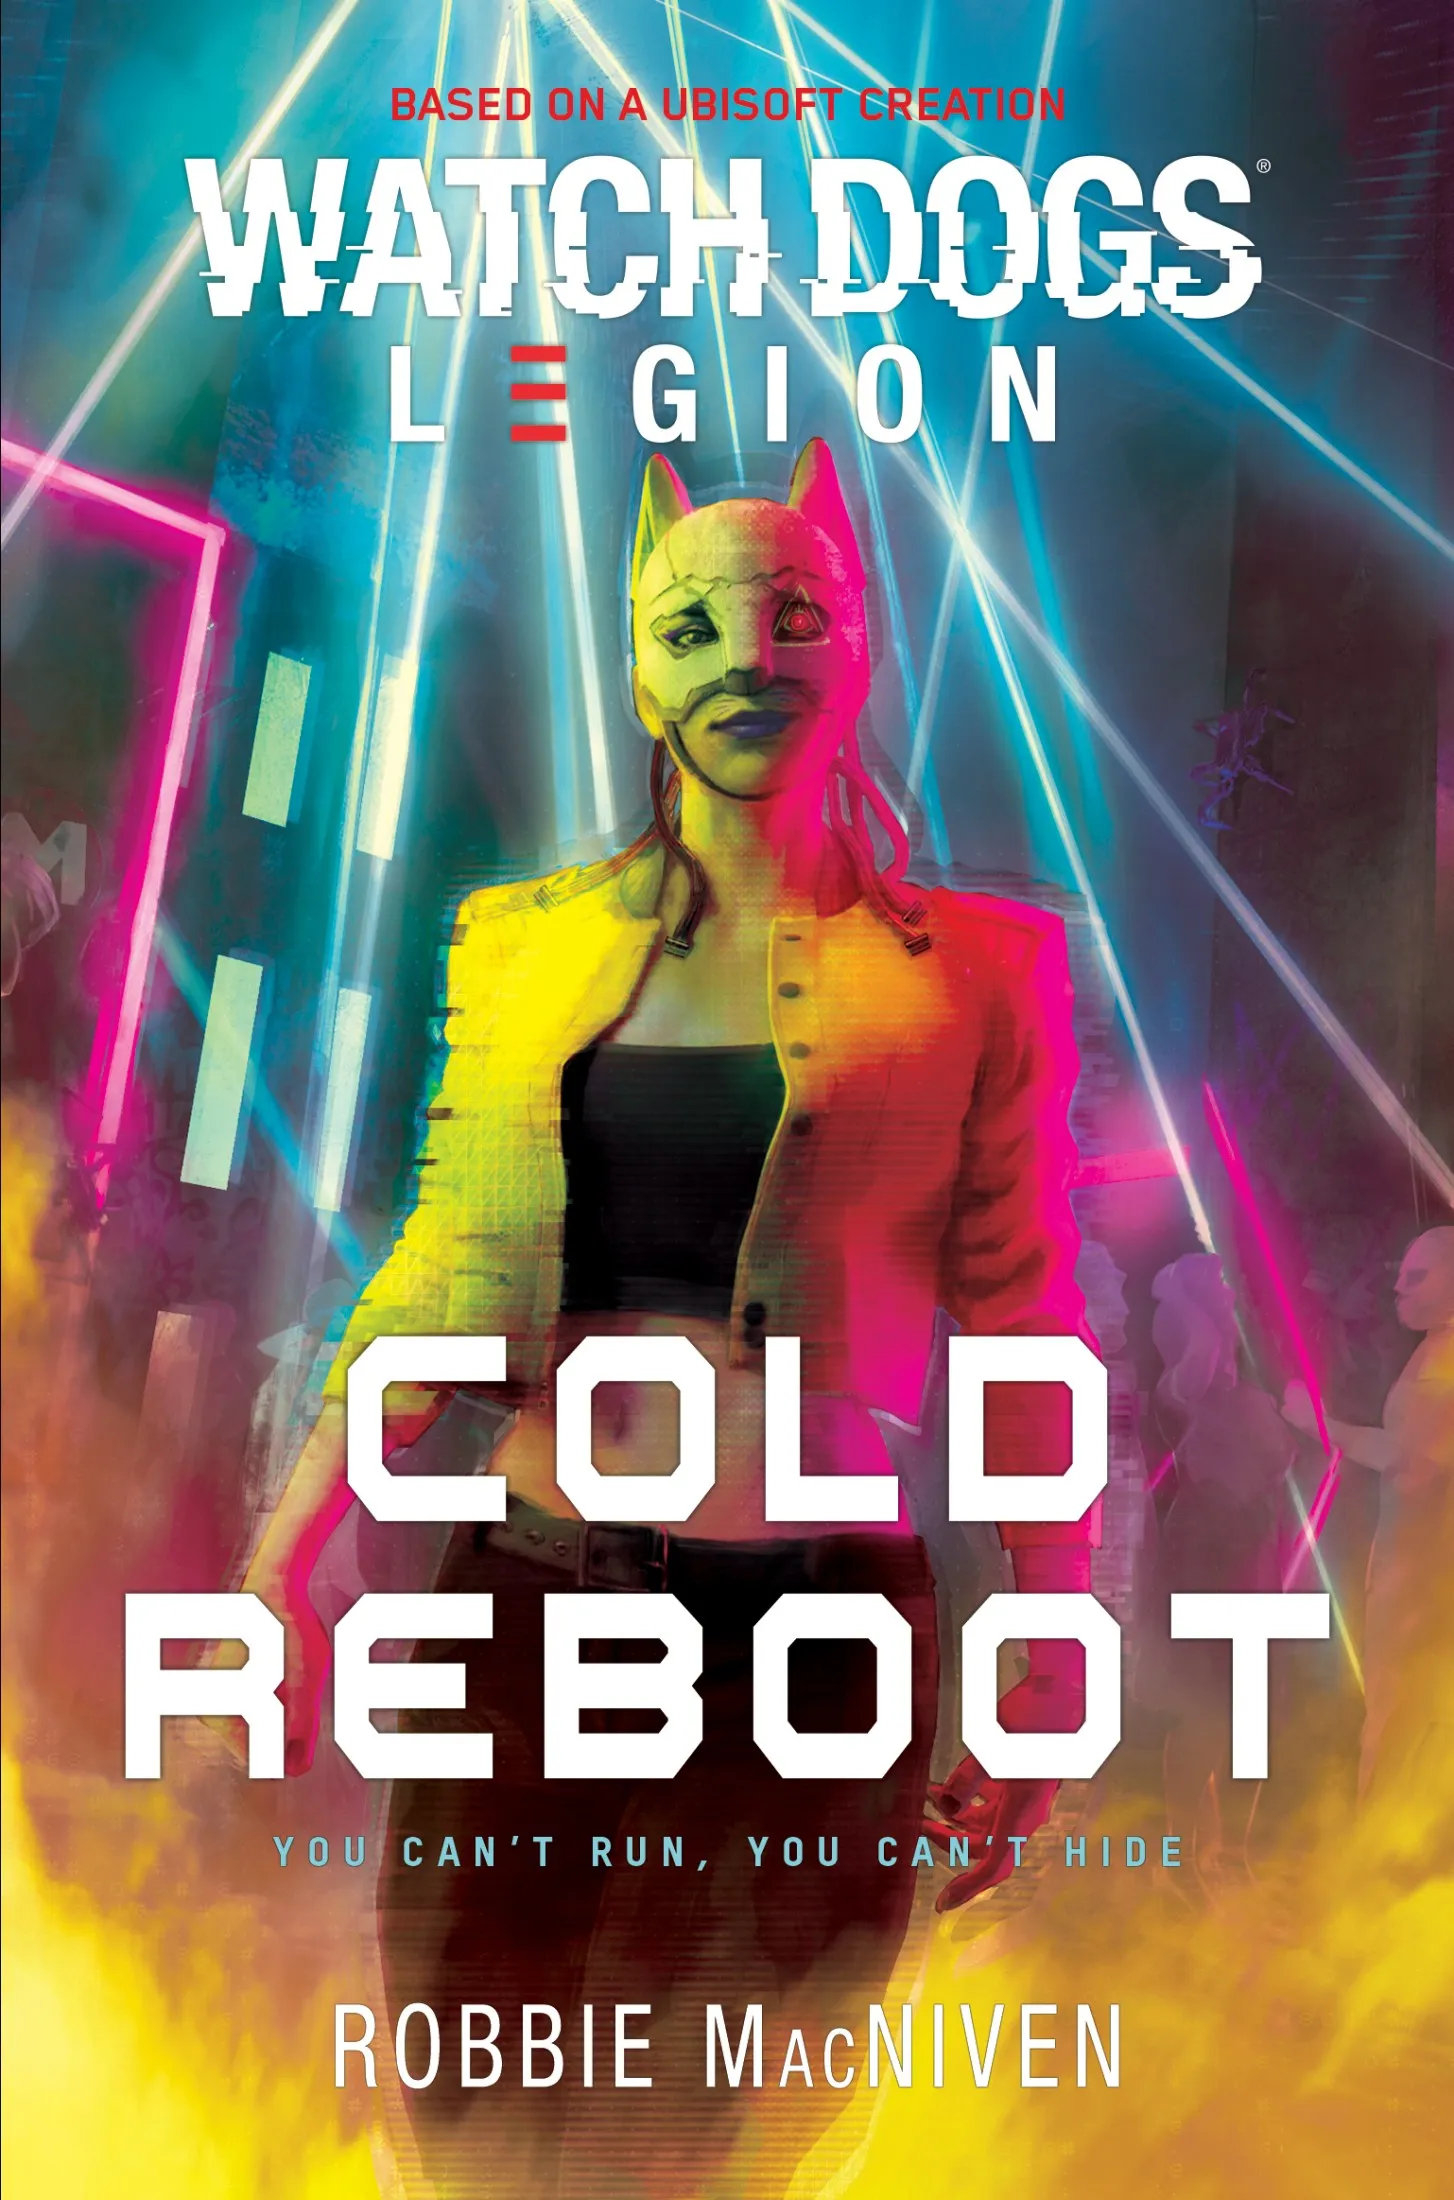 Cold Reboot (Watch Dogs: Legion)